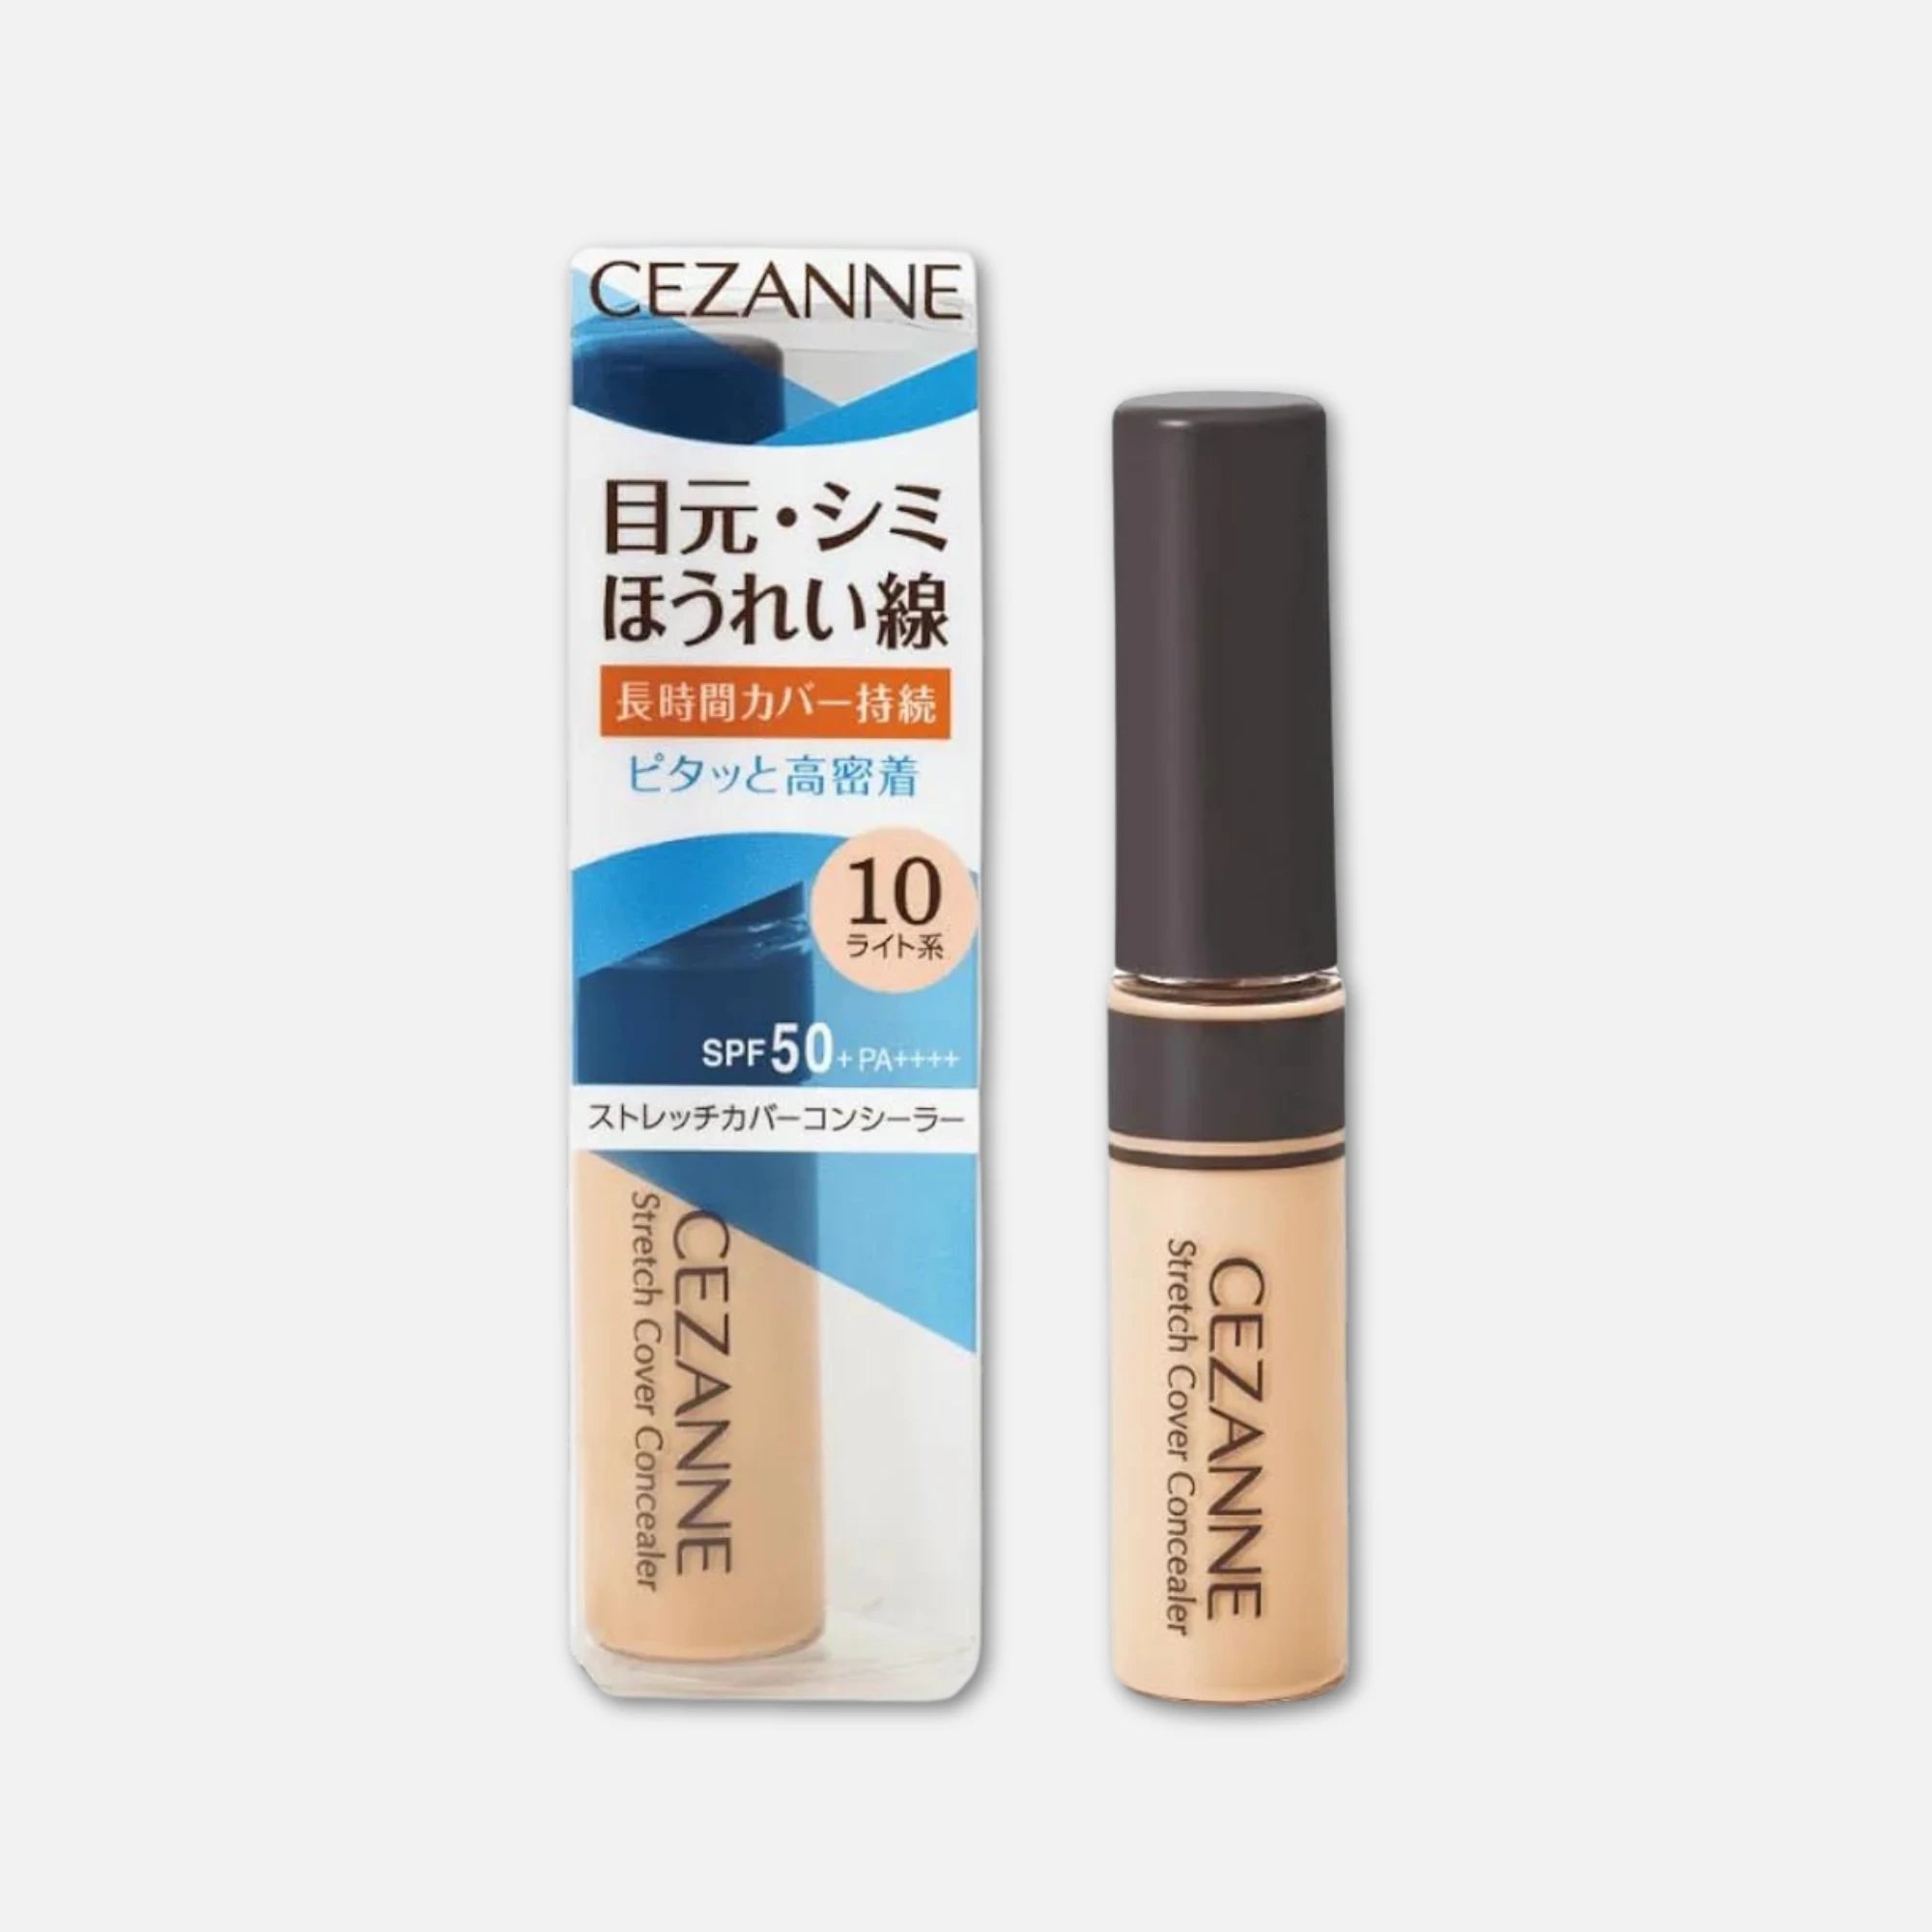 Cezanne Stretch Cover Concealer SPF 50+ PA++++ 8g (Various Shades)